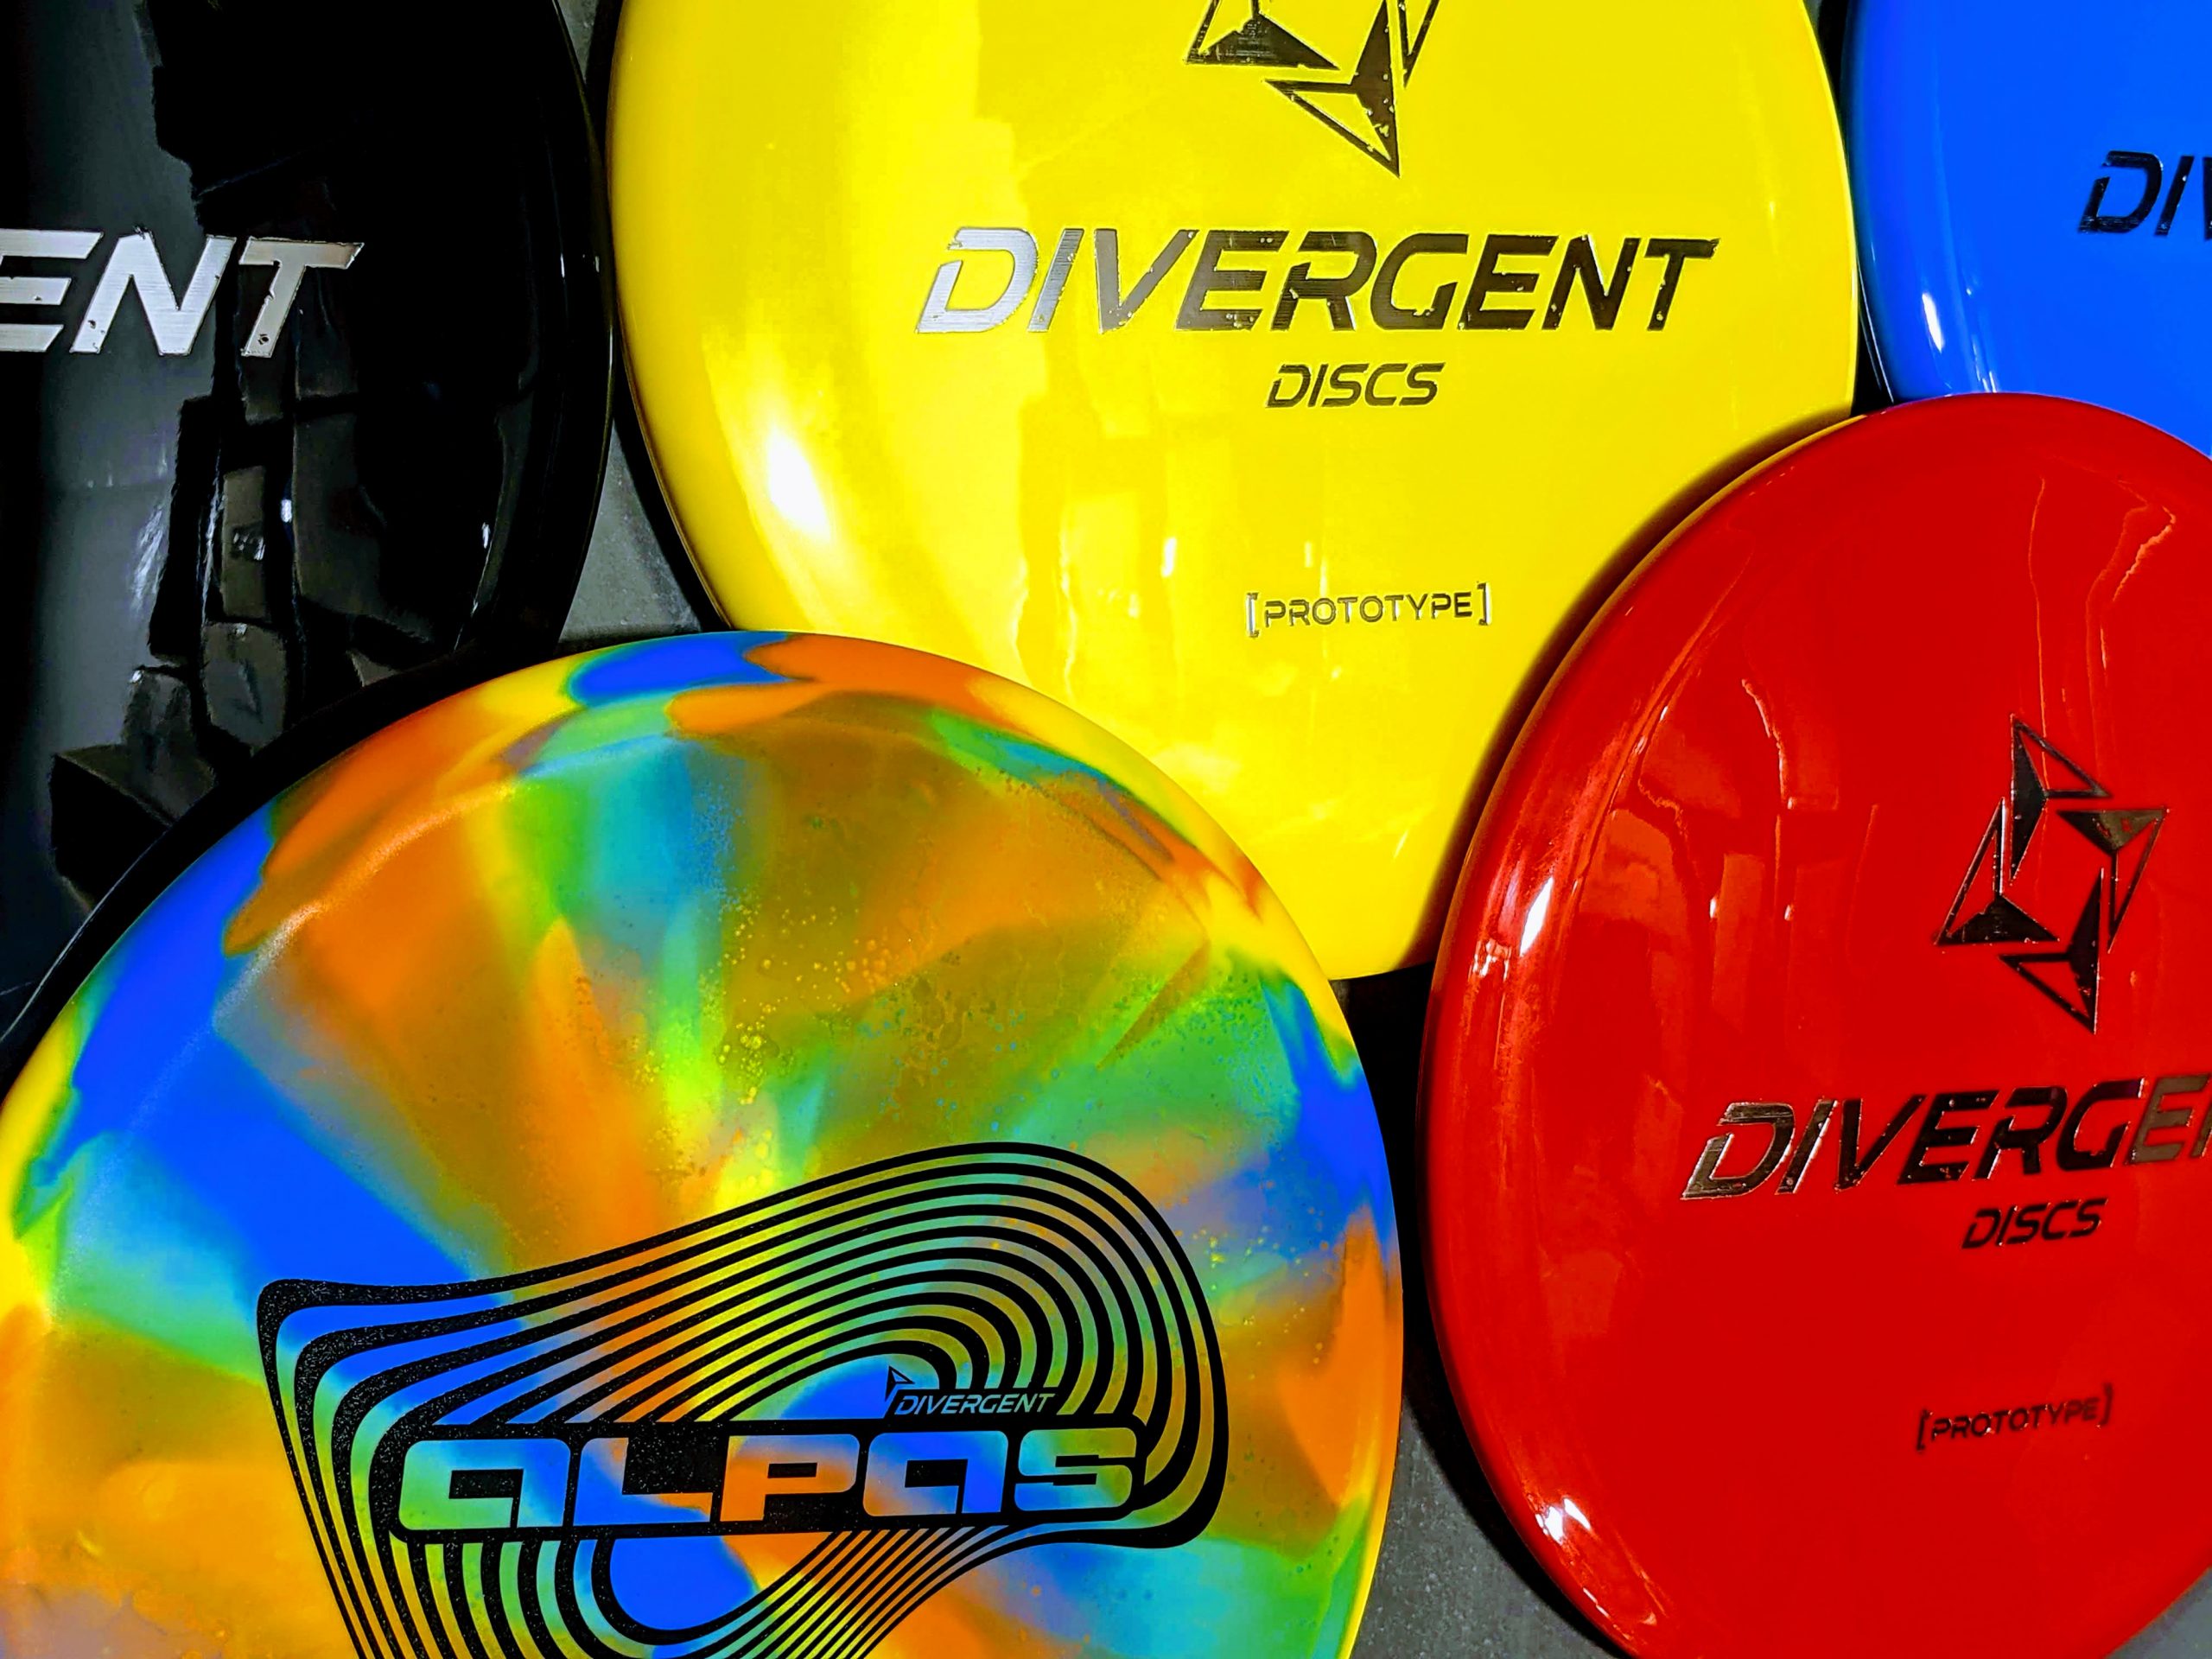 4 New Discs Available for Testers!